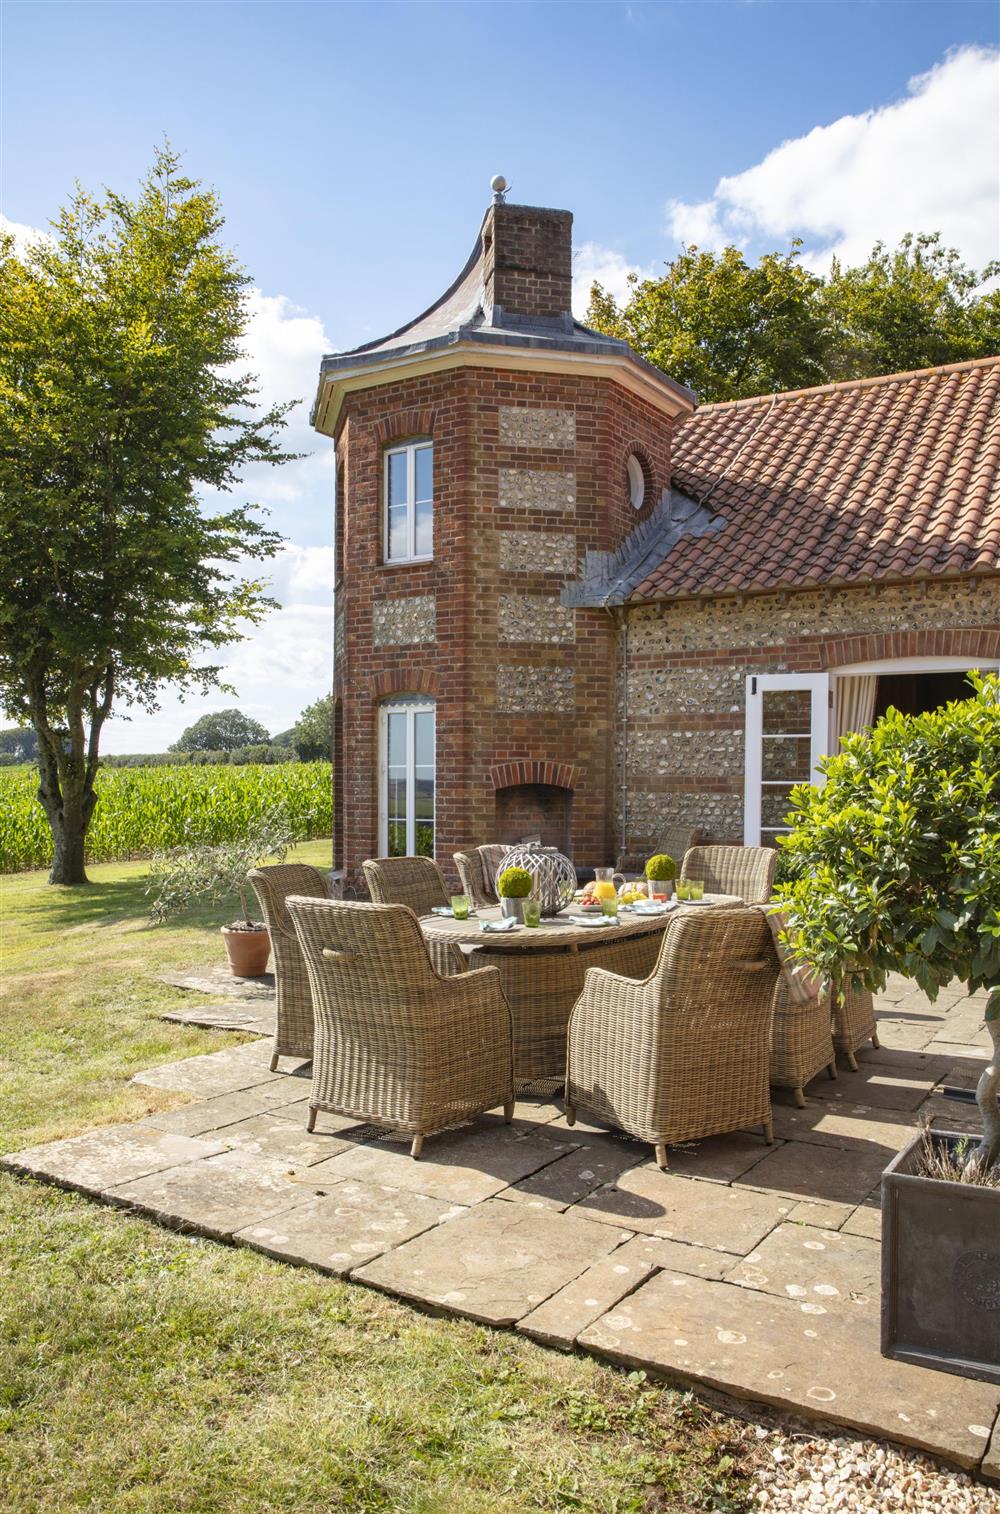 The dining terrace with outstanding rural views at The Shooting Lodge, Dorset